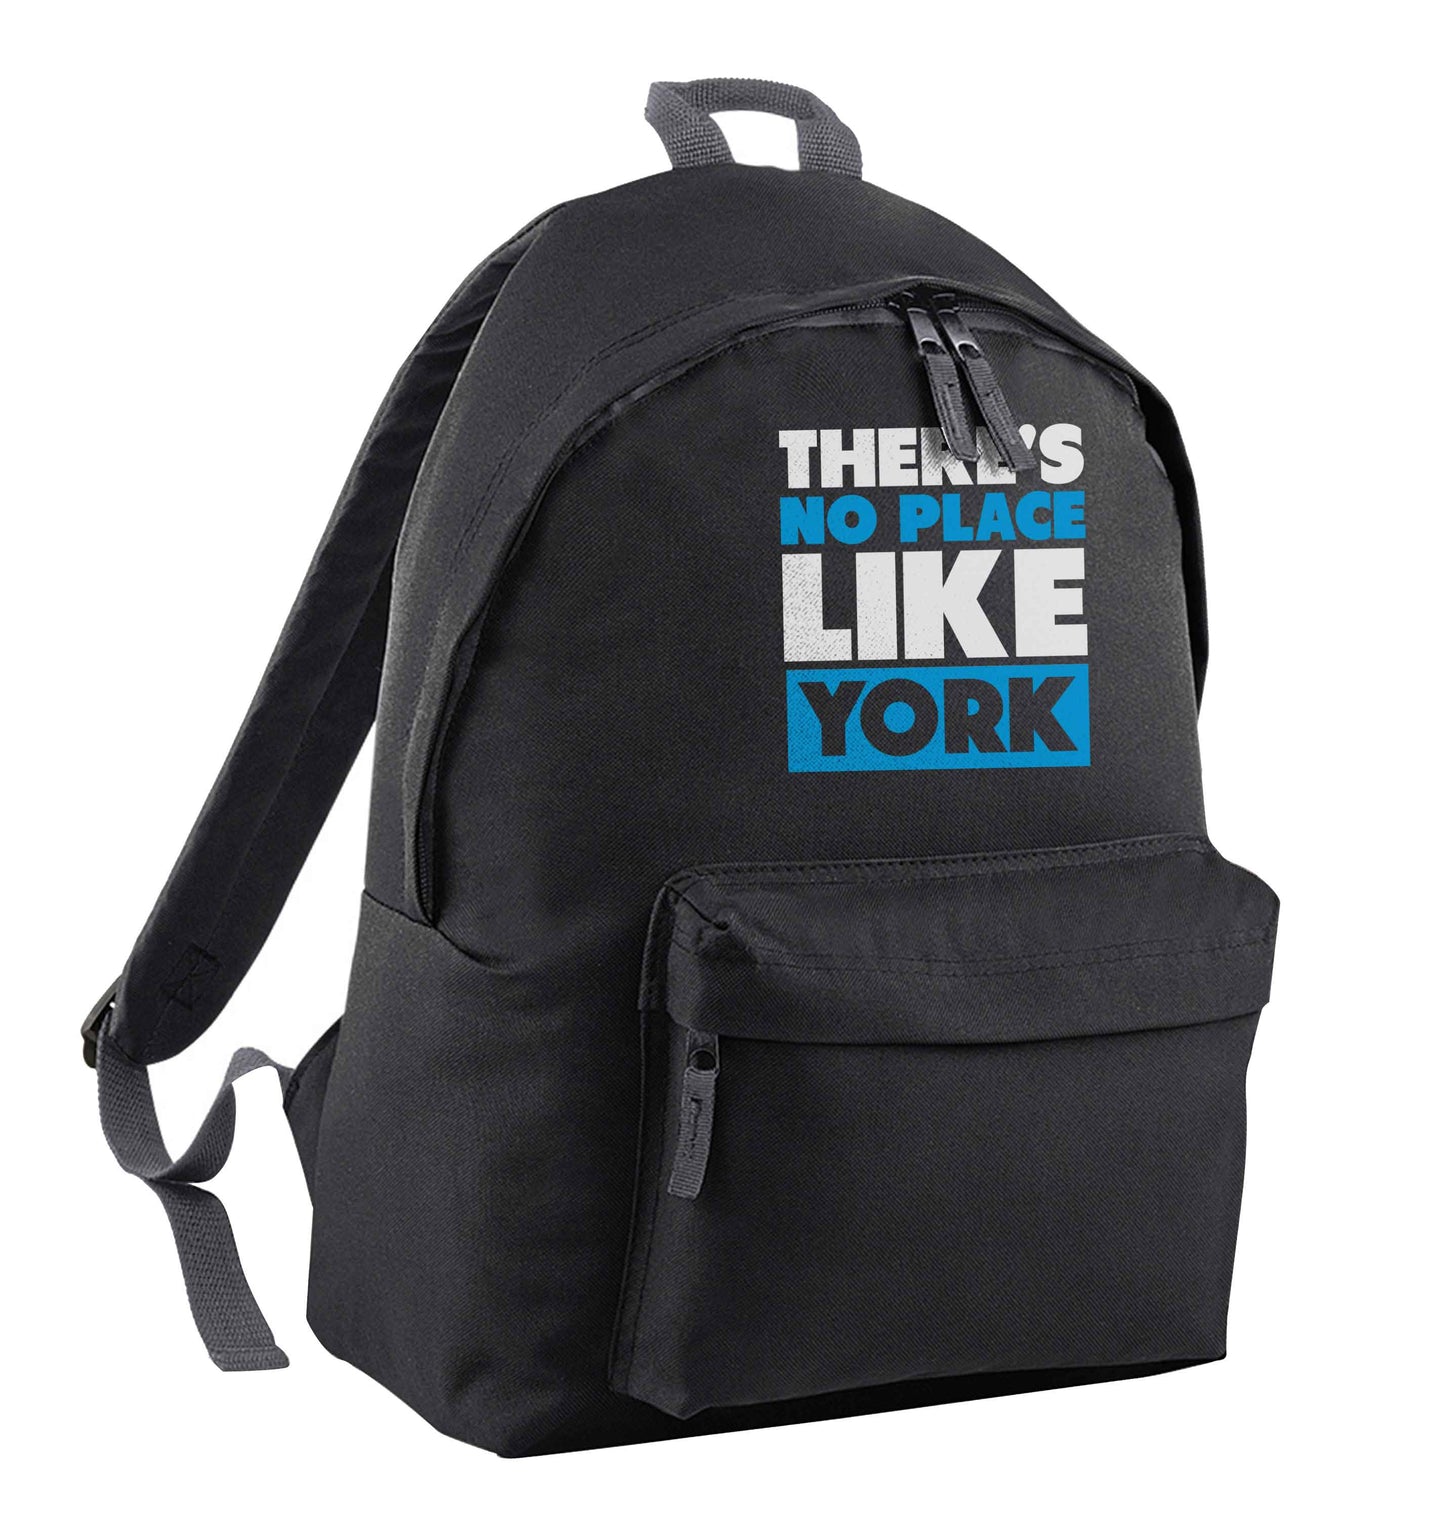 There's no place like york black children's backpack